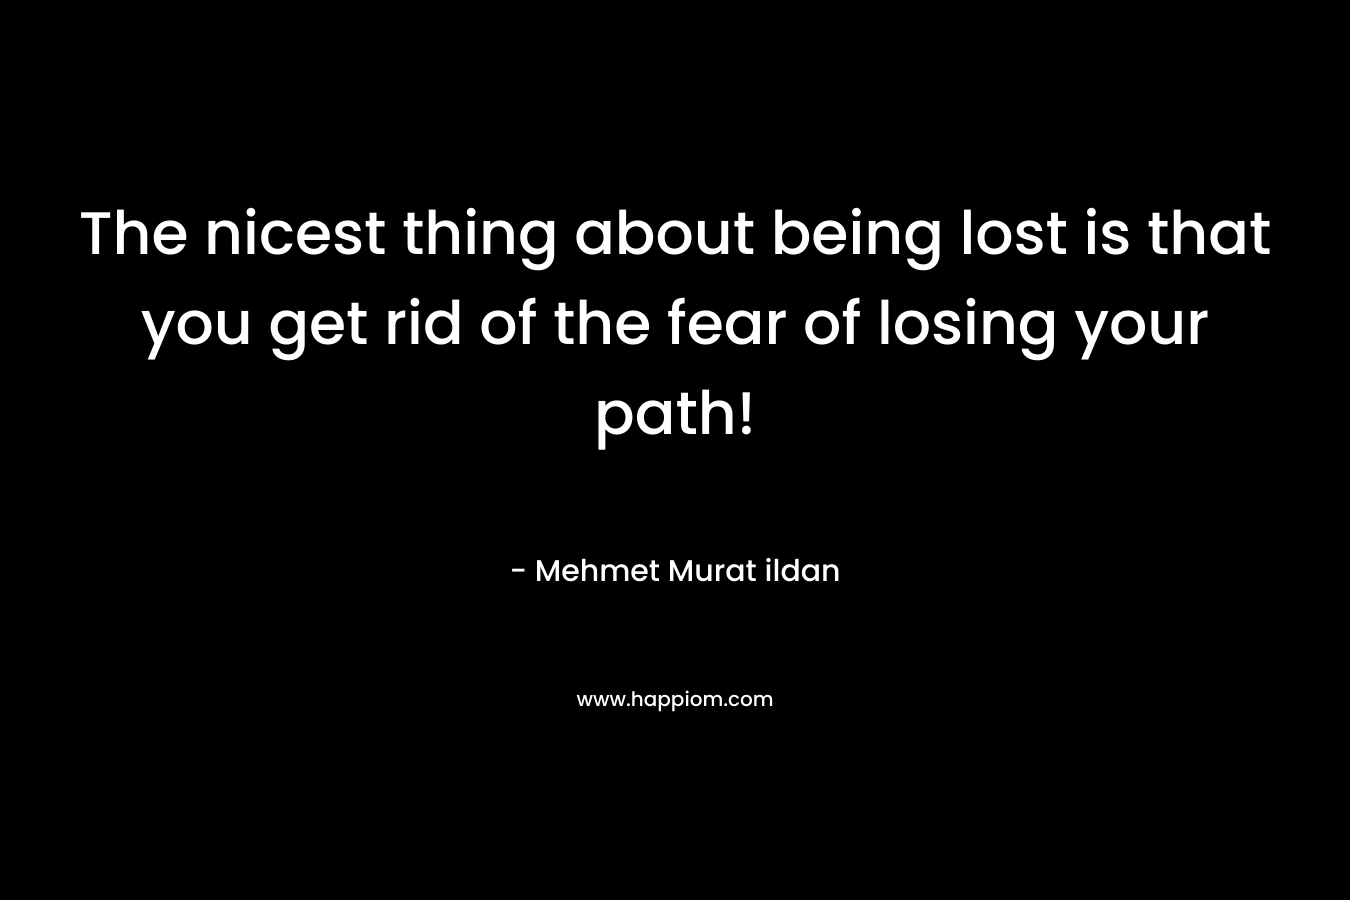 The nicest thing about being lost is that you get rid of the fear of losing your path! – Mehmet Murat ildan